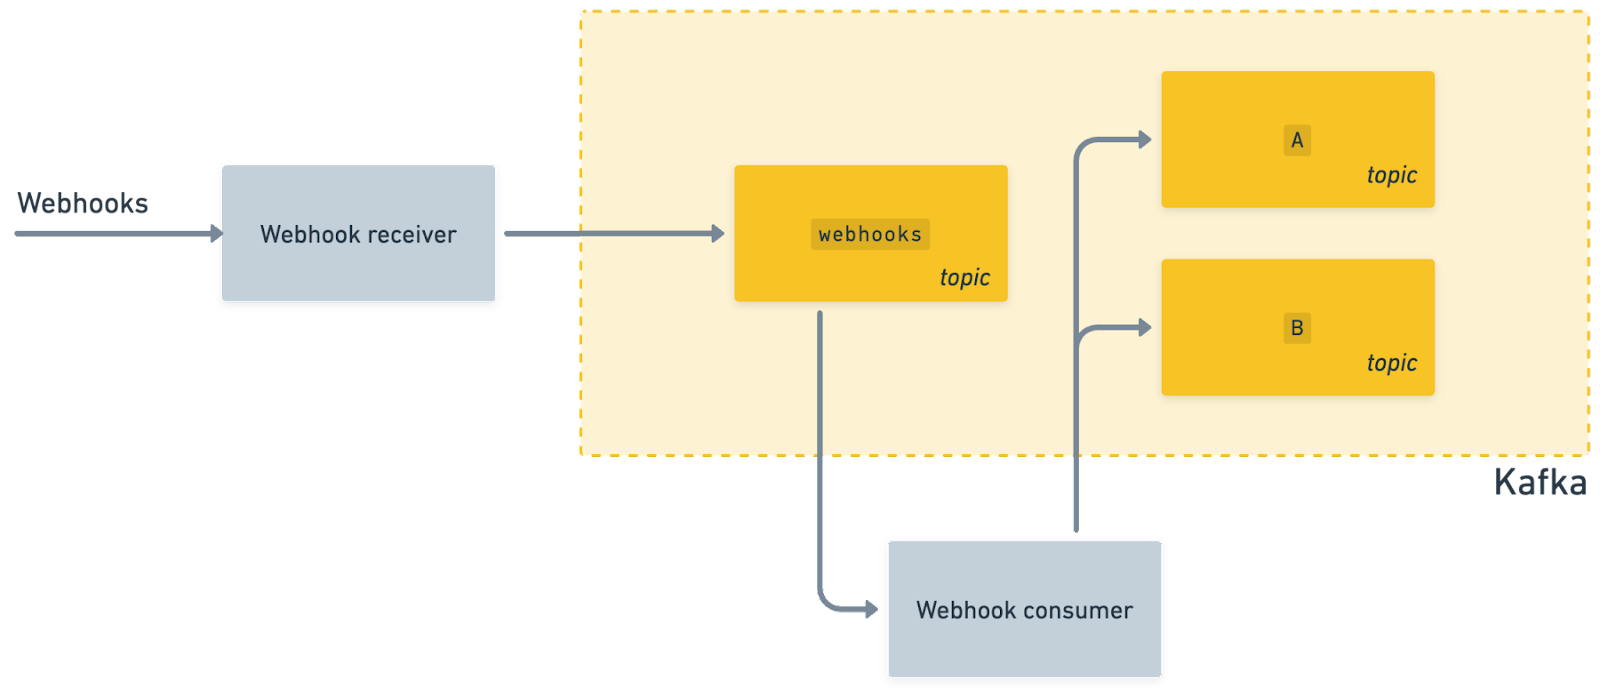 A diagram showing webhooks entering Kafka, then being processed by a consumer before fanning out
to other topics